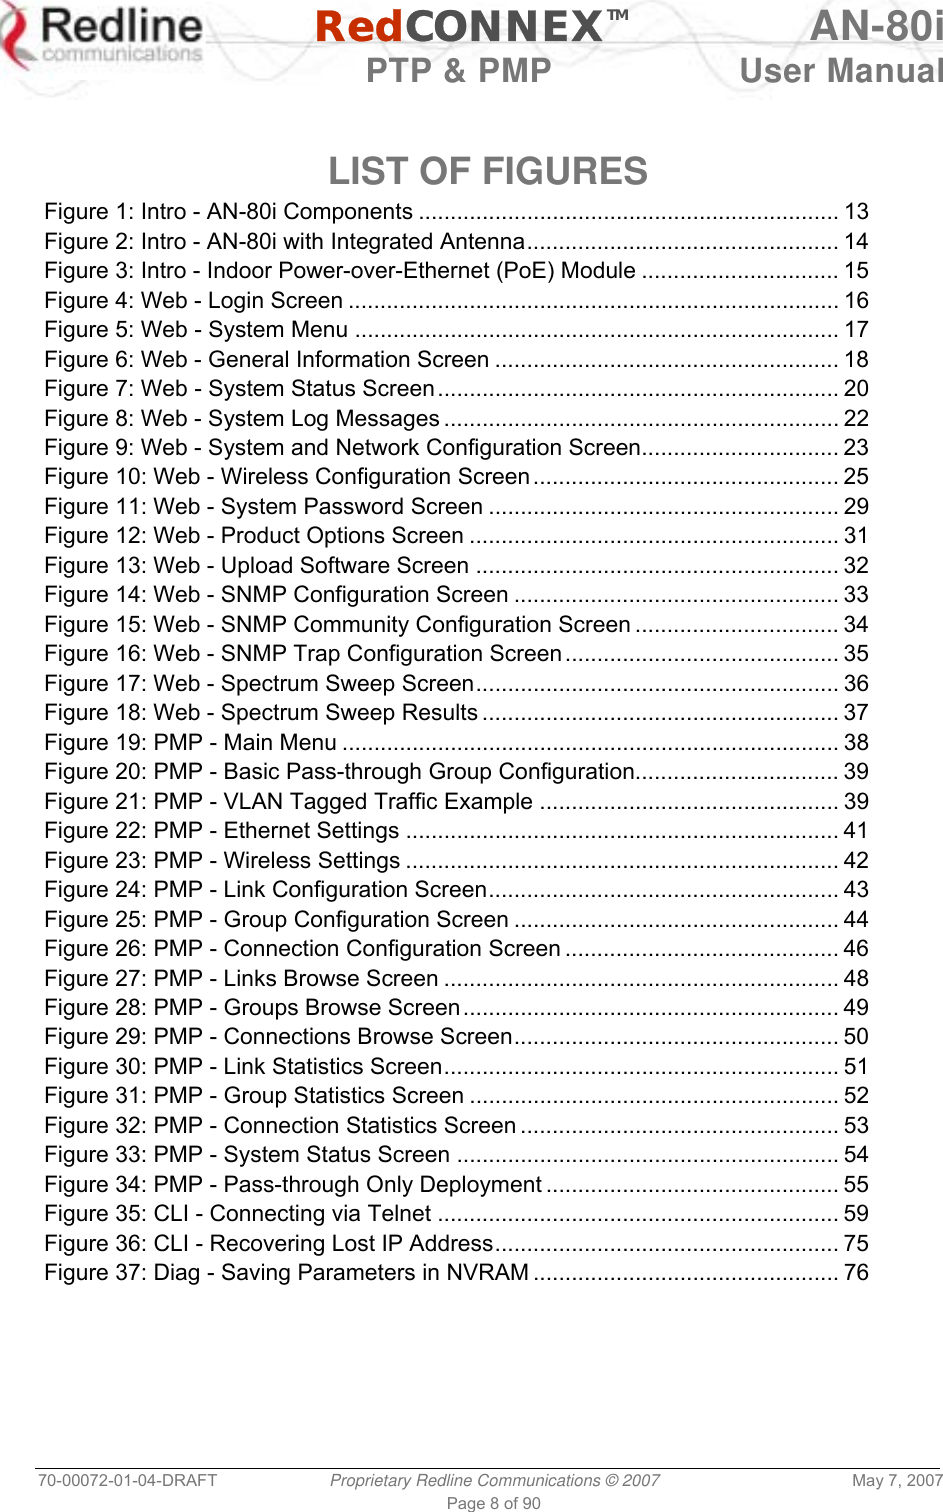   RedCONNEXTM AN-80i   PTP &amp; PMP  User Manual 70-00072-01-04-DRAFT  Proprietary Redline Communications © 2007  May 7, 2007 Page 8 of 90   LIST OF FIGURES Figure 1: Intro - AN-80i Components .................................................................. 13 Figure 2: Intro - AN-80i with Integrated Antenna................................................. 14 Figure 3: Intro - Indoor Power-over-Ethernet (PoE) Module ............................... 15 Figure 4: Web - Login Screen ............................................................................. 16 Figure 5: Web - System Menu ............................................................................ 17 Figure 6: Web - General Information Screen ...................................................... 18 Figure 7: Web - System Status Screen............................................................... 20 Figure 8: Web - System Log Messages .............................................................. 22 Figure 9: Web - System and Network Configuration Screen............................... 23 Figure 10: Web - Wireless Configuration Screen................................................ 25 Figure 11: Web - System Password Screen ....................................................... 29 Figure 12: Web - Product Options Screen .......................................................... 31 Figure 13: Web - Upload Software Screen ......................................................... 32 Figure 14: Web - SNMP Configuration Screen ................................................... 33 Figure 15: Web - SNMP Community Configuration Screen ................................ 34 Figure 16: Web - SNMP Trap Configuration Screen........................................... 35 Figure 17: Web - Spectrum Sweep Screen......................................................... 36 Figure 18: Web - Spectrum Sweep Results ........................................................ 37 Figure 19: PMP - Main Menu .............................................................................. 38 Figure 20: PMP - Basic Pass-through Group Configuration................................ 39 Figure 21: PMP - VLAN Tagged Traffic Example ............................................... 39 Figure 22: PMP - Ethernet Settings .................................................................... 41 Figure 23: PMP - Wireless Settings .................................................................... 42 Figure 24: PMP - Link Configuration Screen....................................................... 43 Figure 25: PMP - Group Configuration Screen ................................................... 44 Figure 26: PMP - Connection Configuration Screen ........................................... 46 Figure 27: PMP - Links Browse Screen .............................................................. 48 Figure 28: PMP - Groups Browse Screen........................................................... 49 Figure 29: PMP - Connections Browse Screen................................................... 50 Figure 30: PMP - Link Statistics Screen.............................................................. 51 Figure 31: PMP - Group Statistics Screen .......................................................... 52 Figure 32: PMP - Connection Statistics Screen .................................................. 53 Figure 33: PMP - System Status Screen ............................................................ 54 Figure 34: PMP - Pass-through Only Deployment .............................................. 55 Figure 35: CLI - Connecting via Telnet ............................................................... 59 Figure 36: CLI - Recovering Lost IP Address...................................................... 75 Figure 37: Diag - Saving Parameters in NVRAM ................................................ 76    